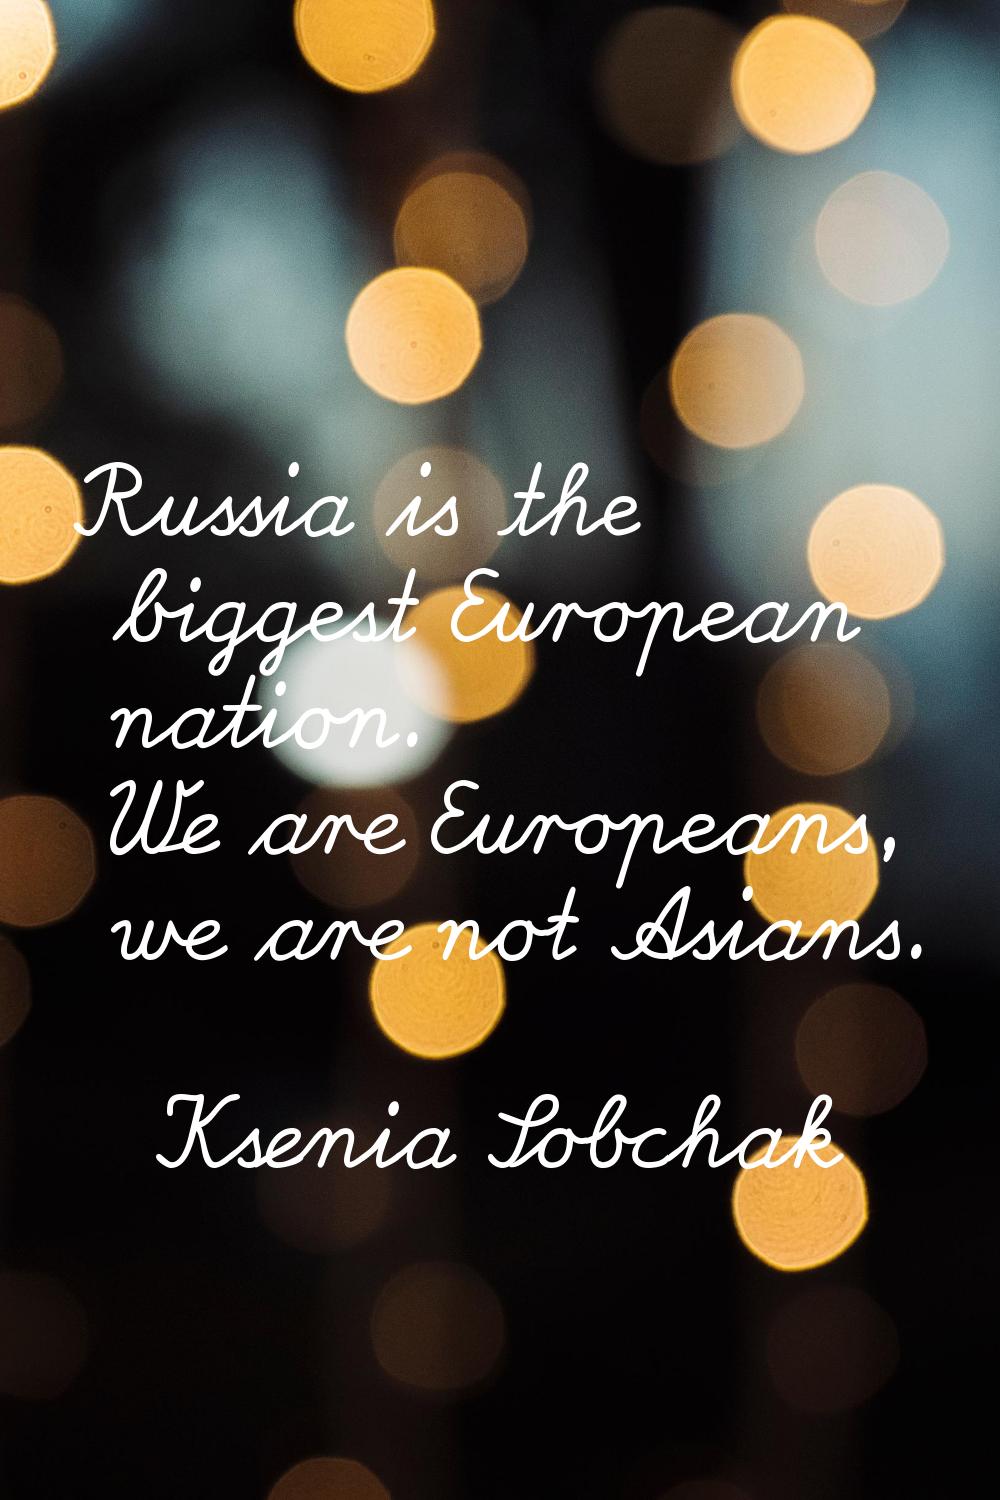 Russia is the biggest European nation. We are Europeans, we are not Asians.